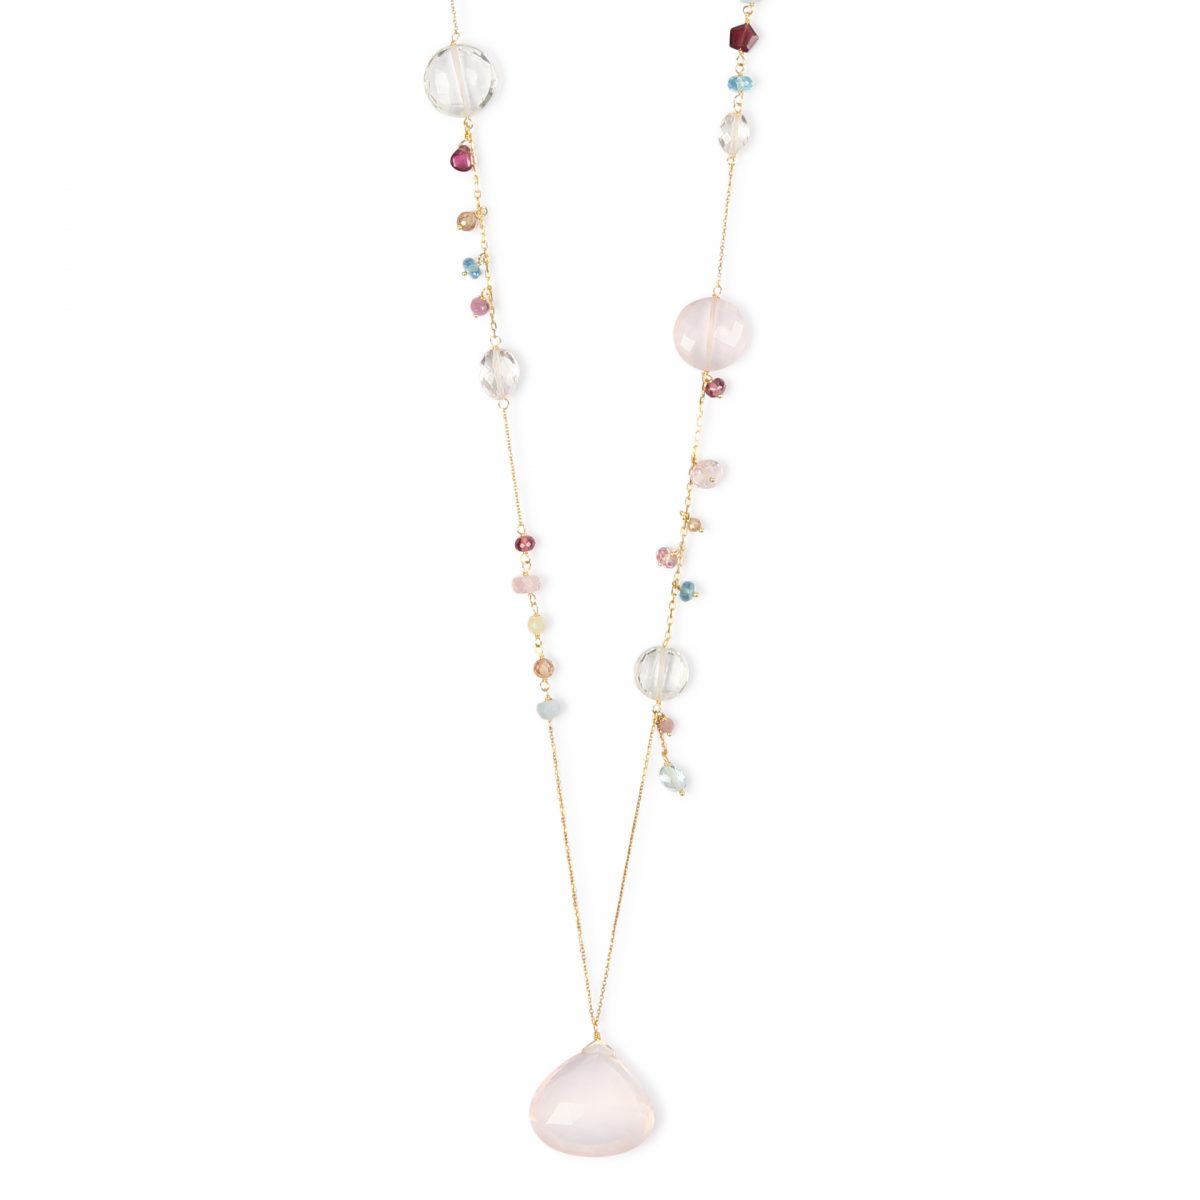 swp_necklace_17_241